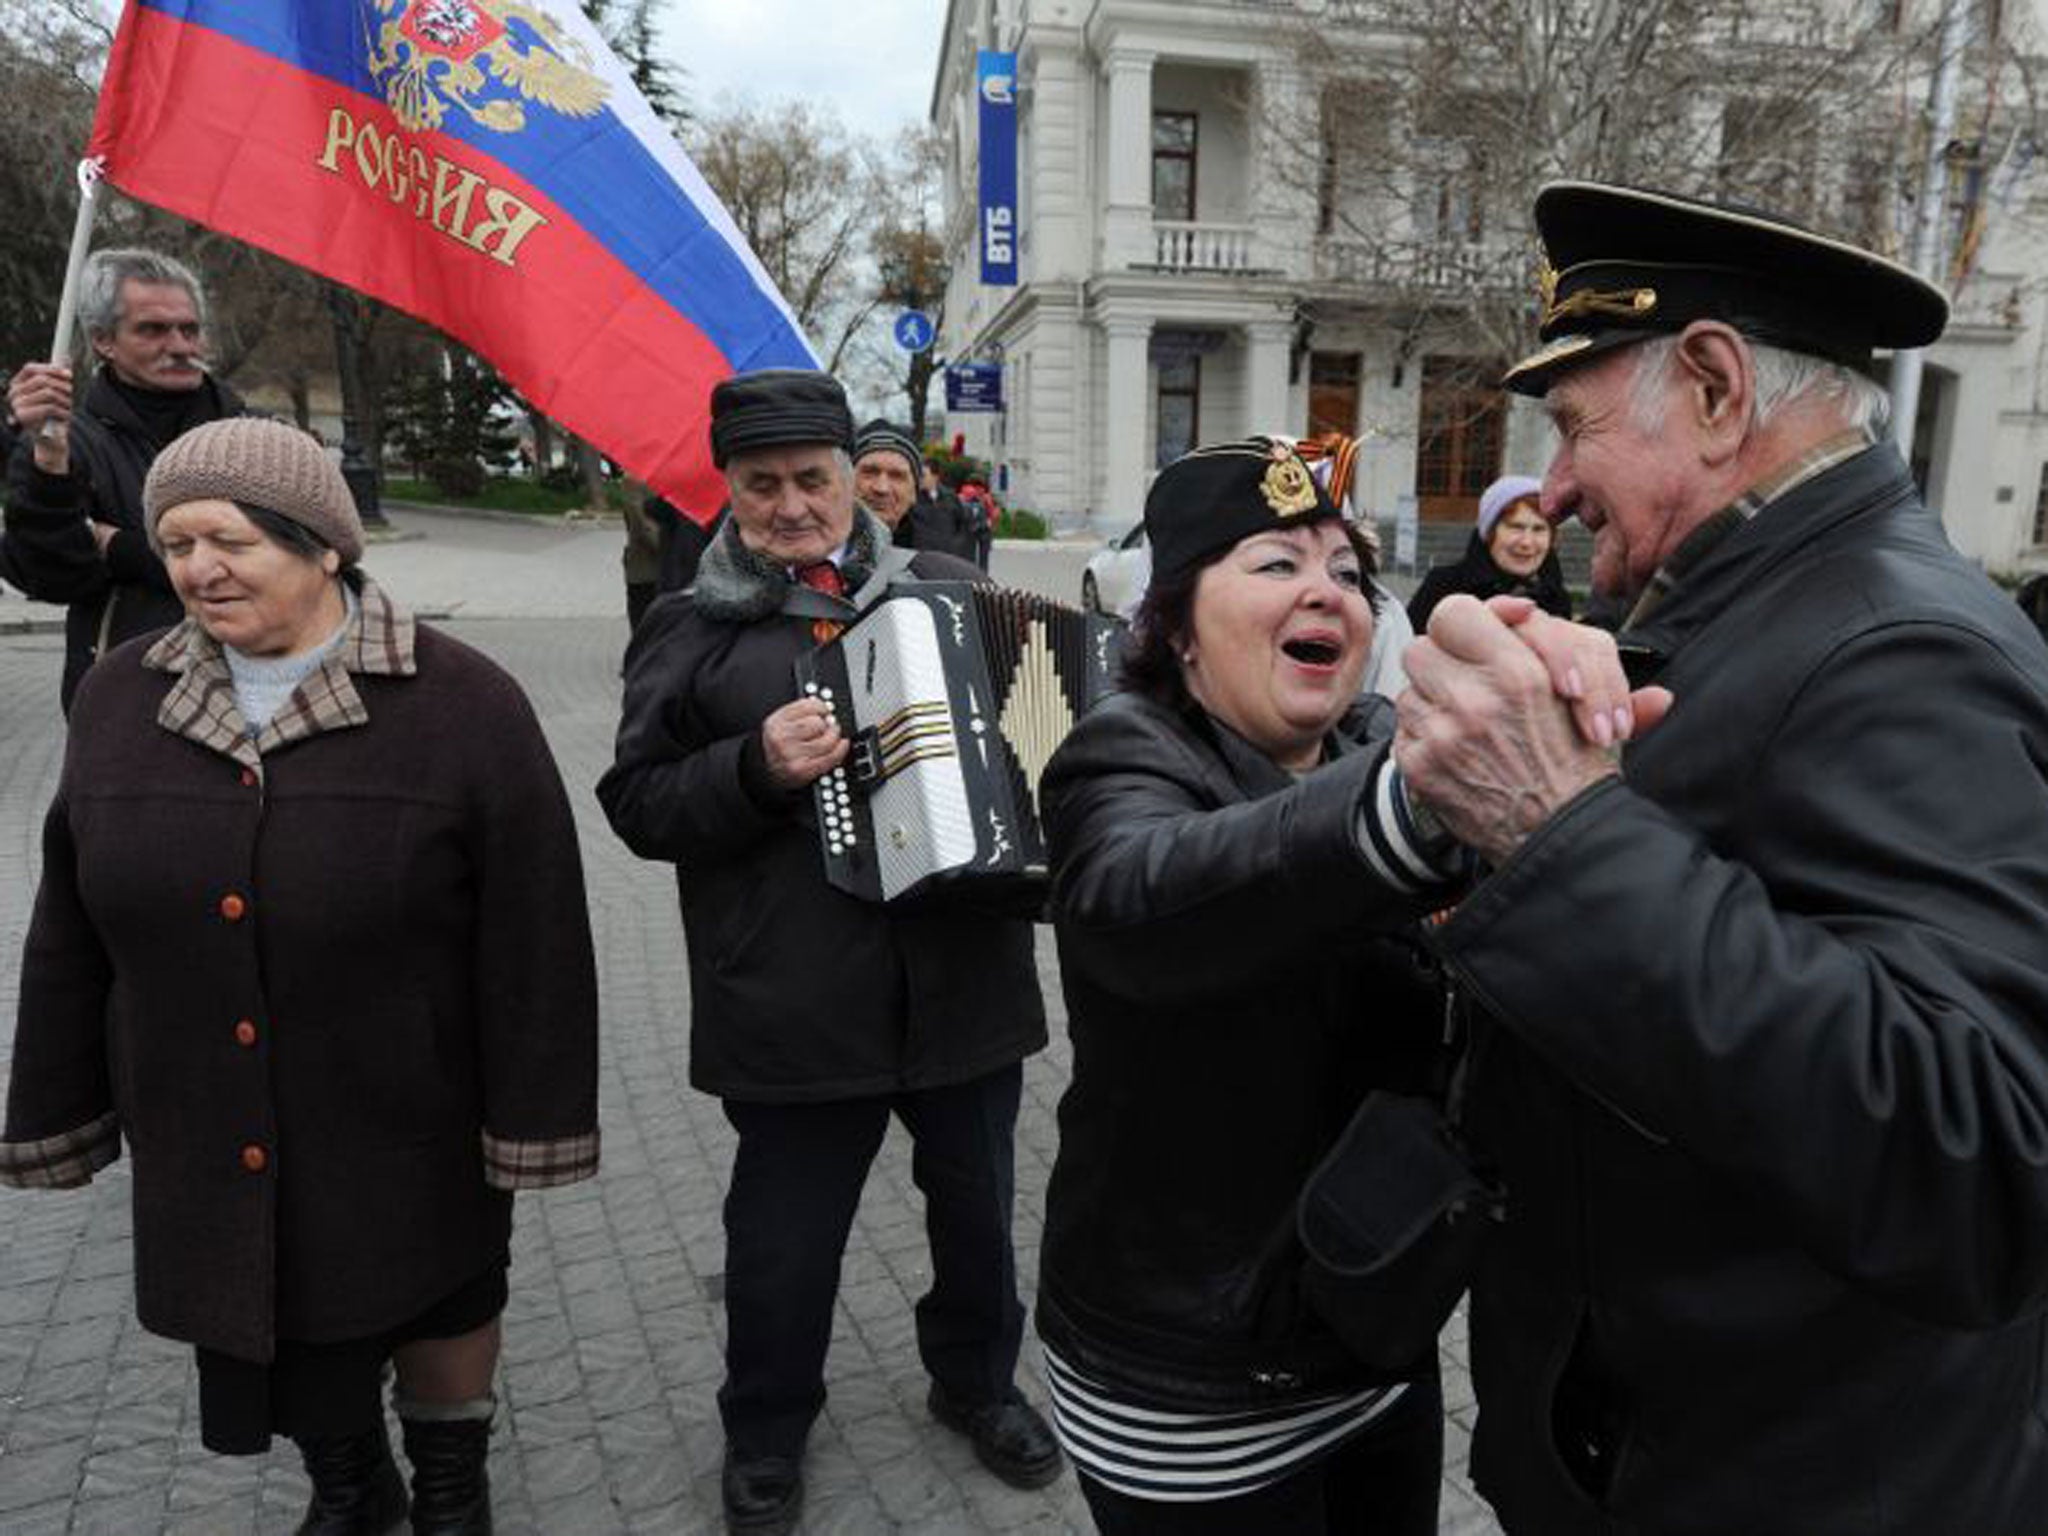 Celebrations continue in Sevastopol after Sunday’s vote over-whelmingly backed Crimea rejoining Russia